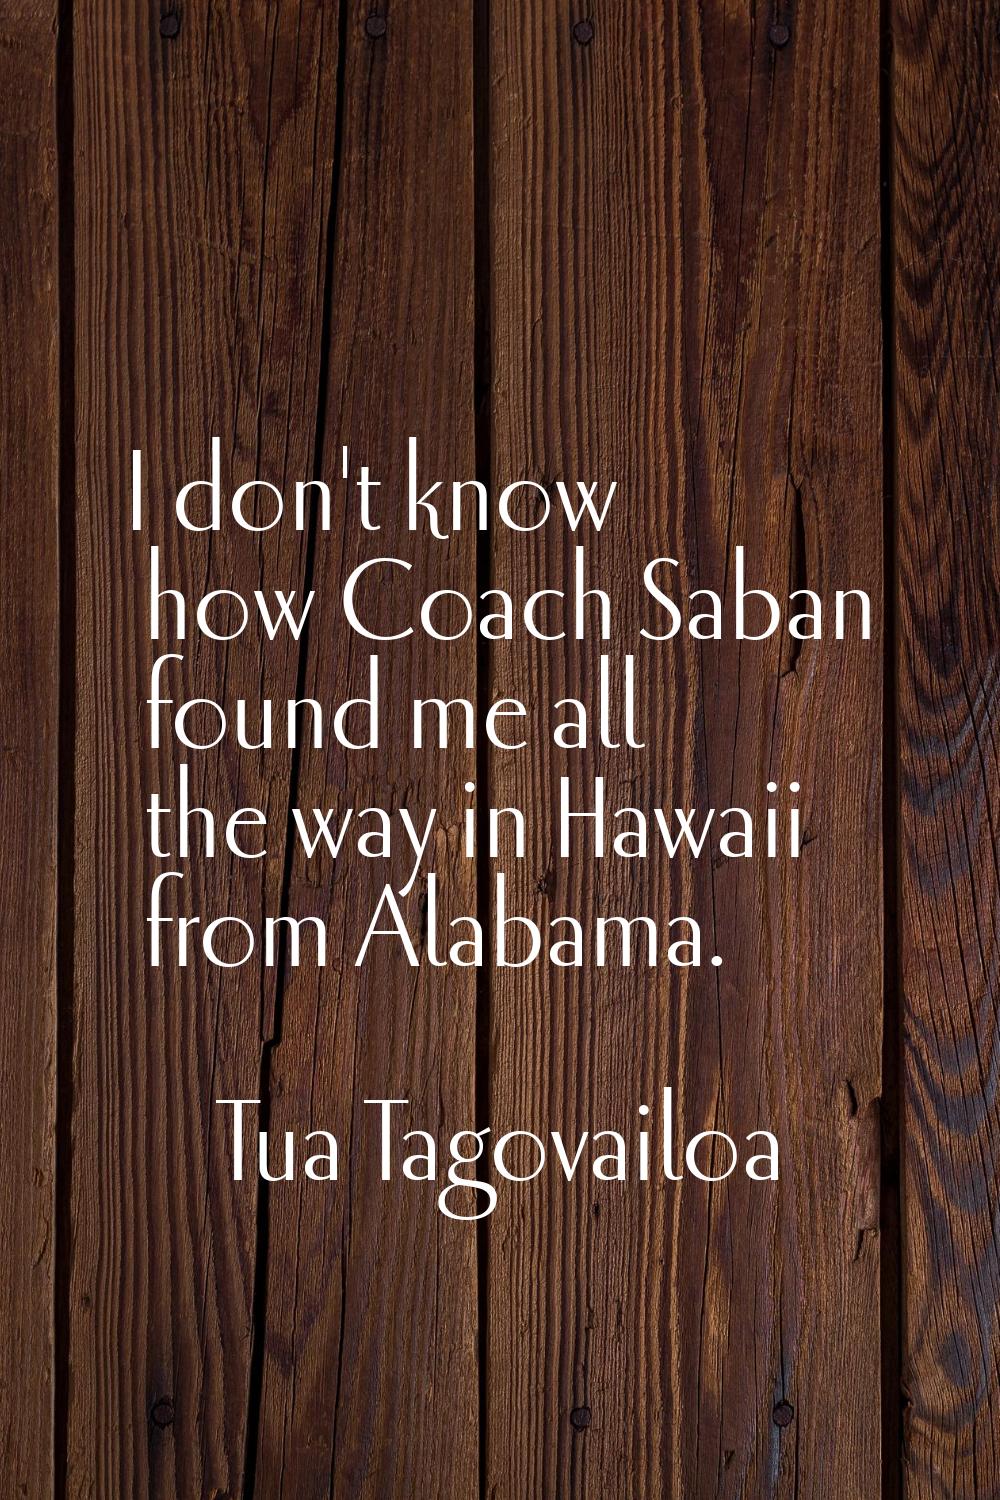 I don't know how Coach Saban found me all the way in Hawaii from Alabama.